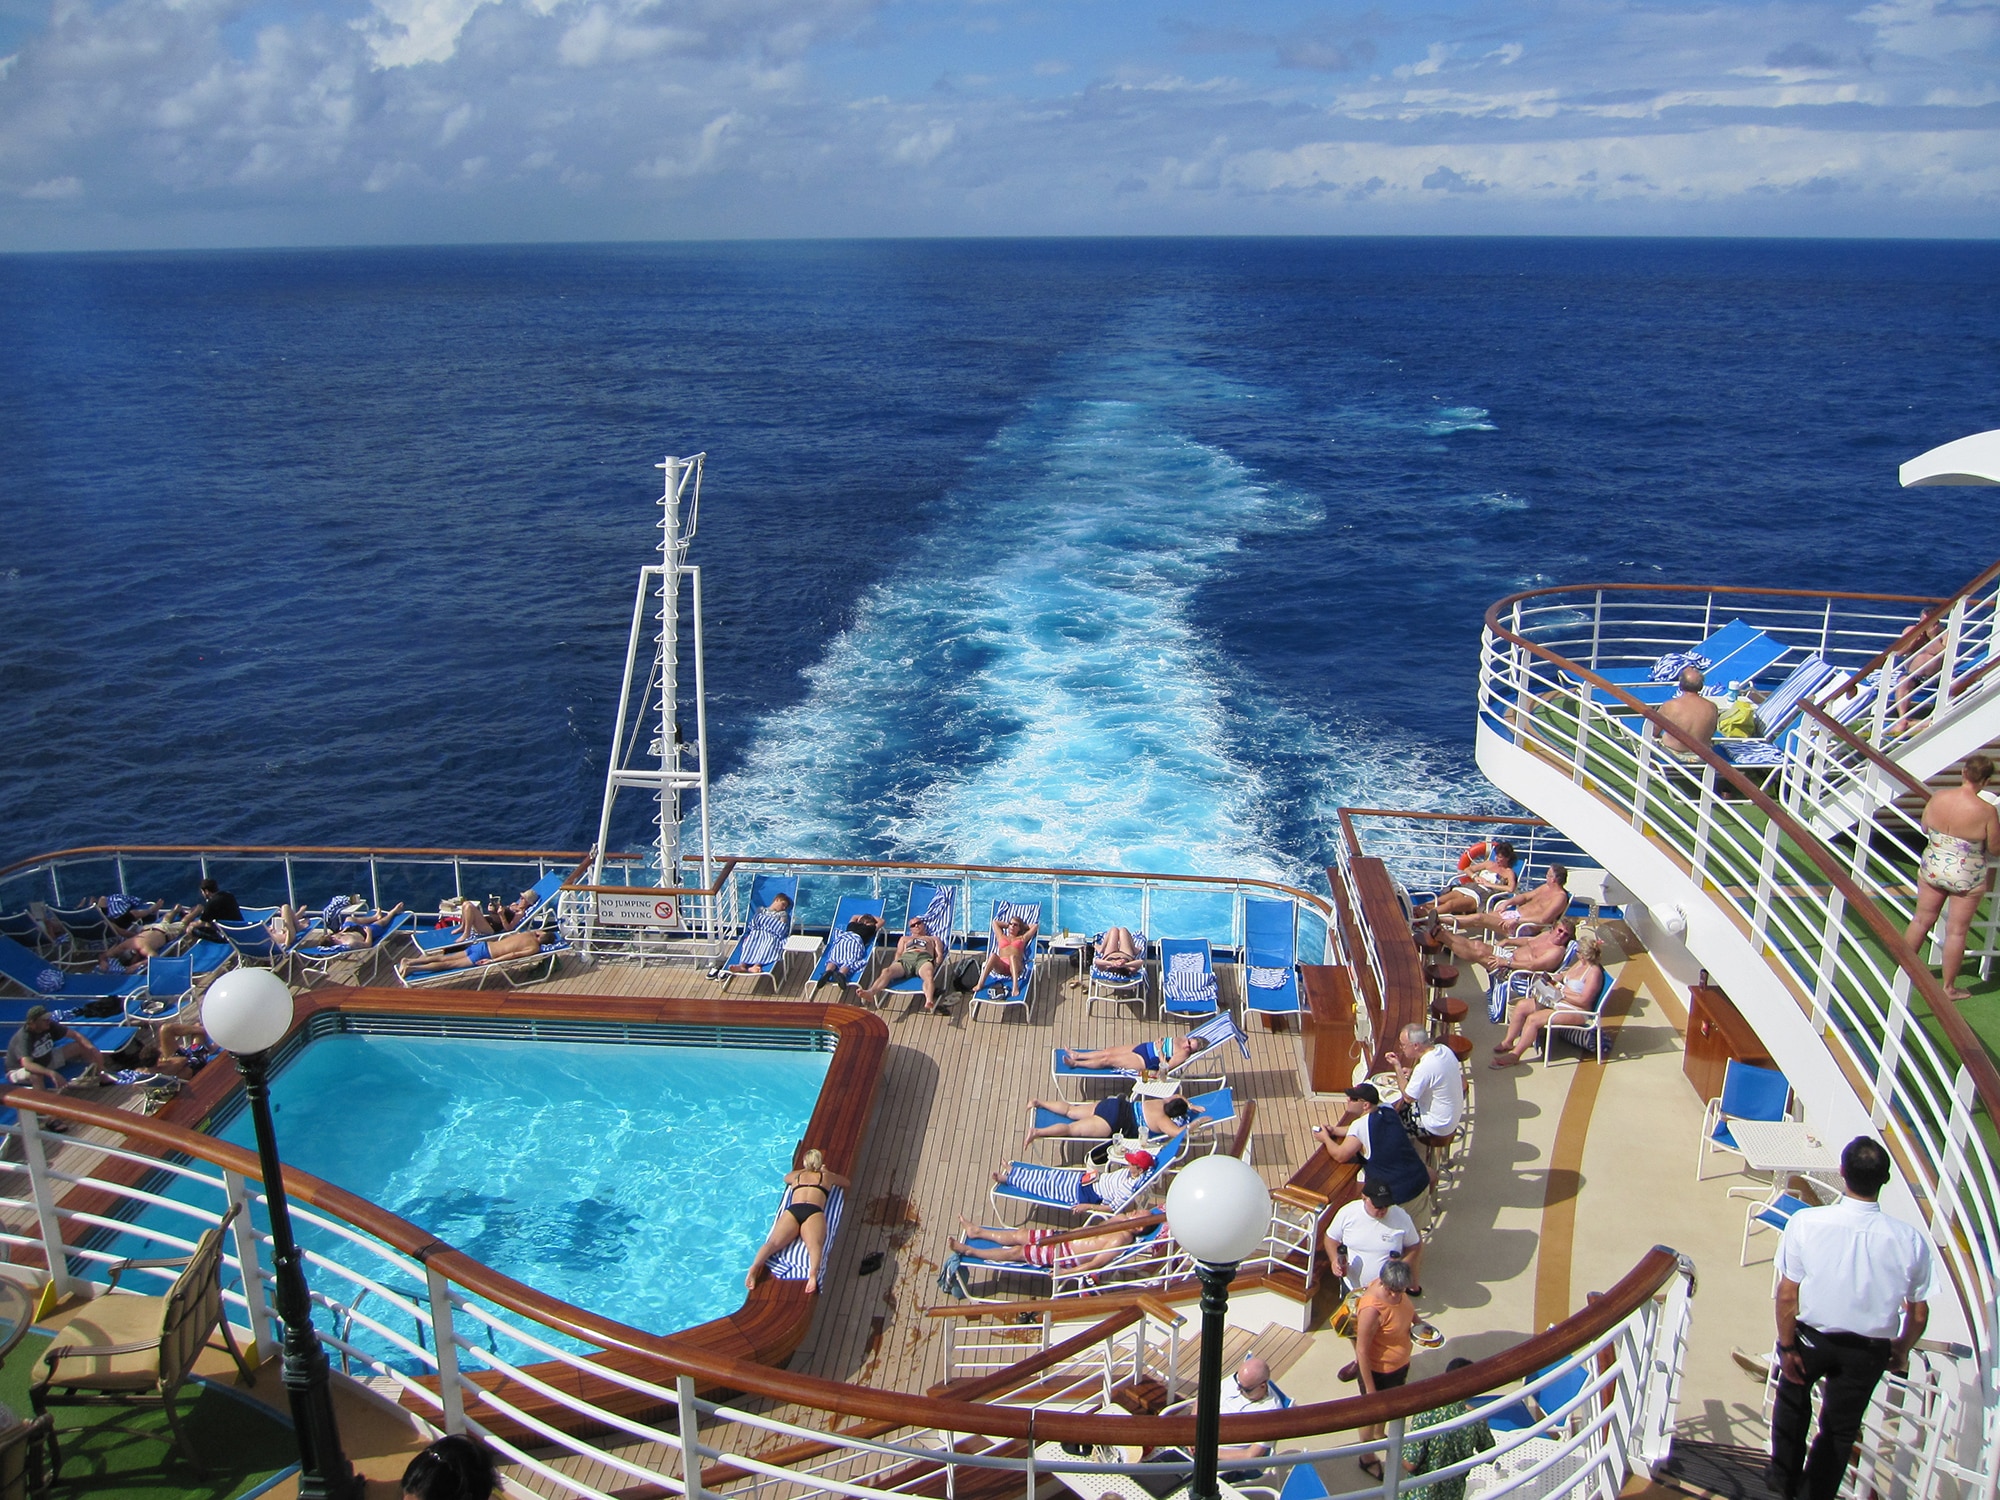 Common Cruise Questions Answered